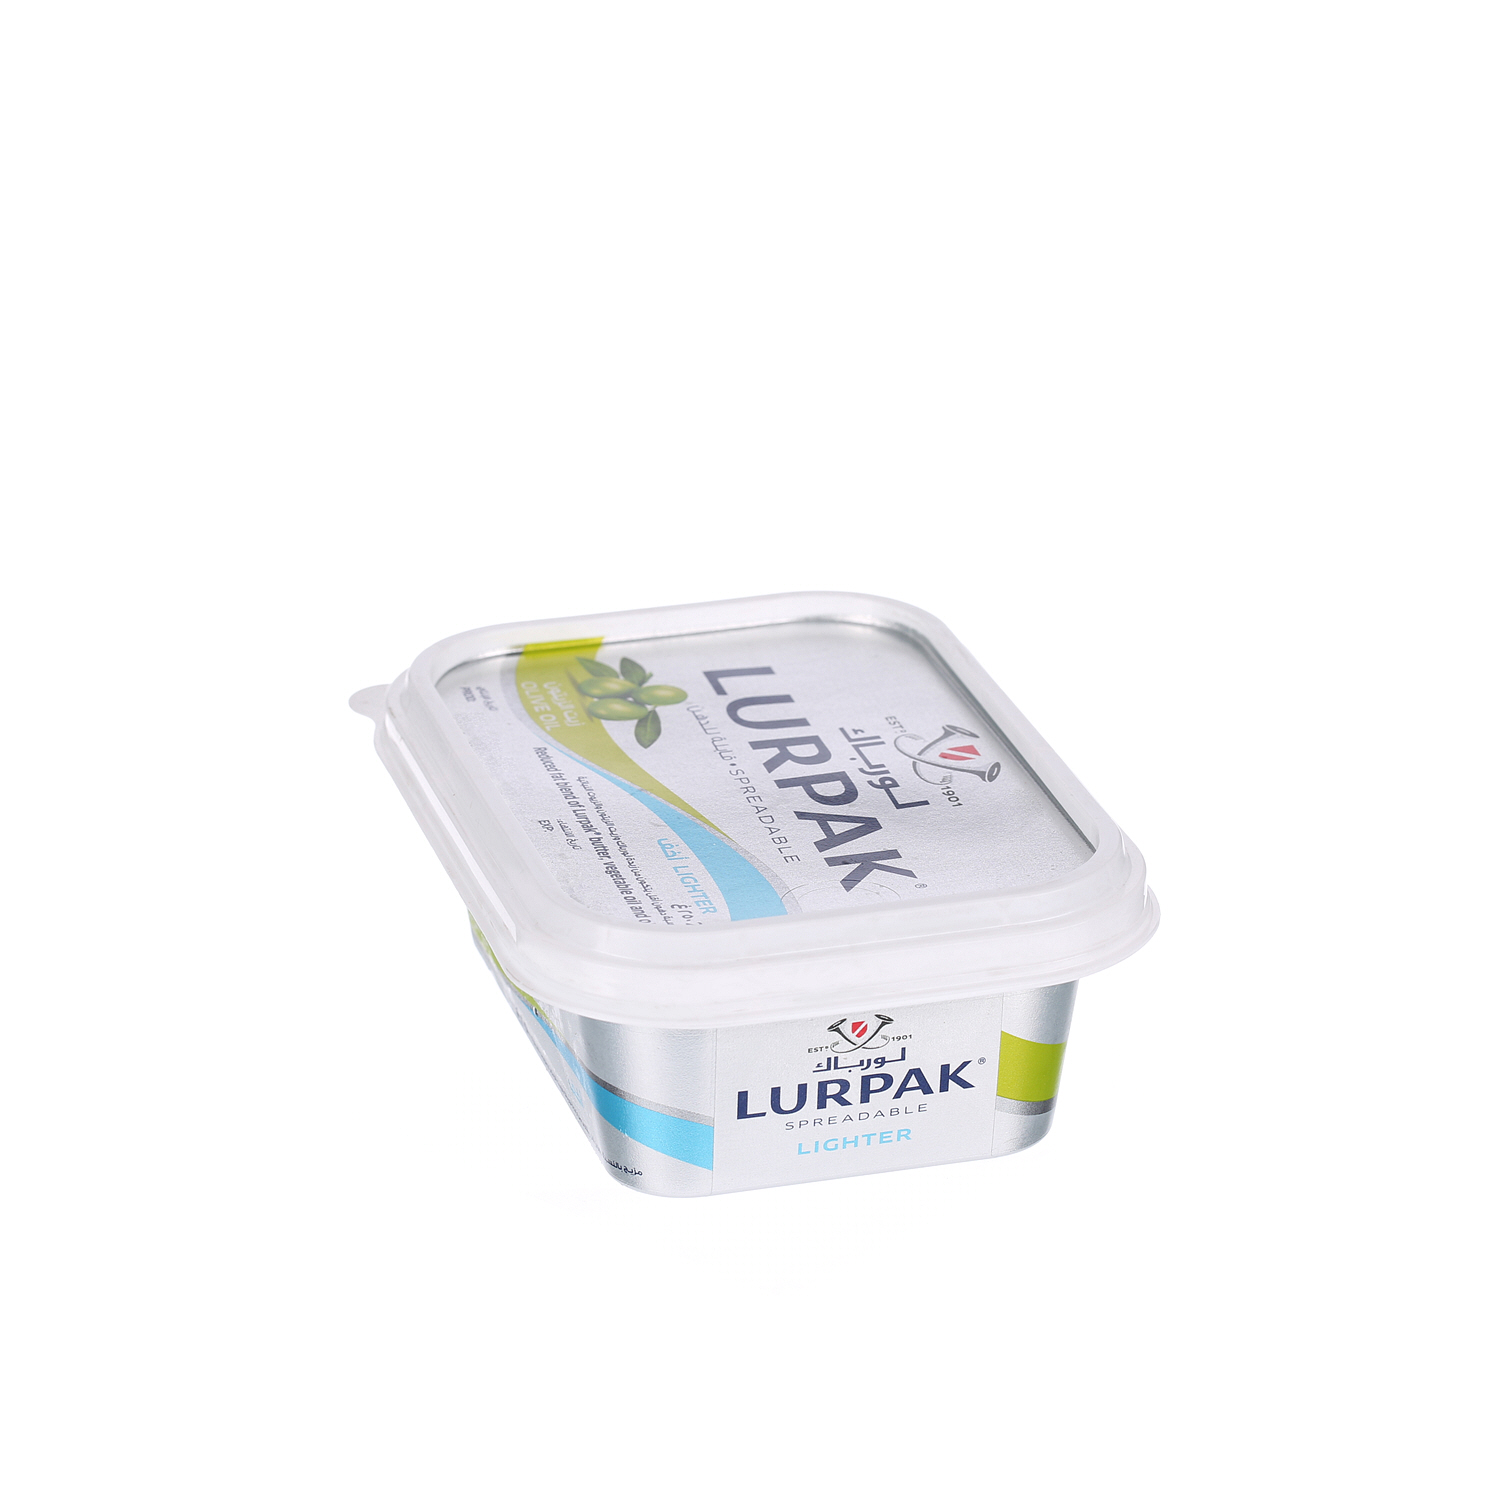 Lurpak Spreadable with Olive Oil Unsalted 250gm